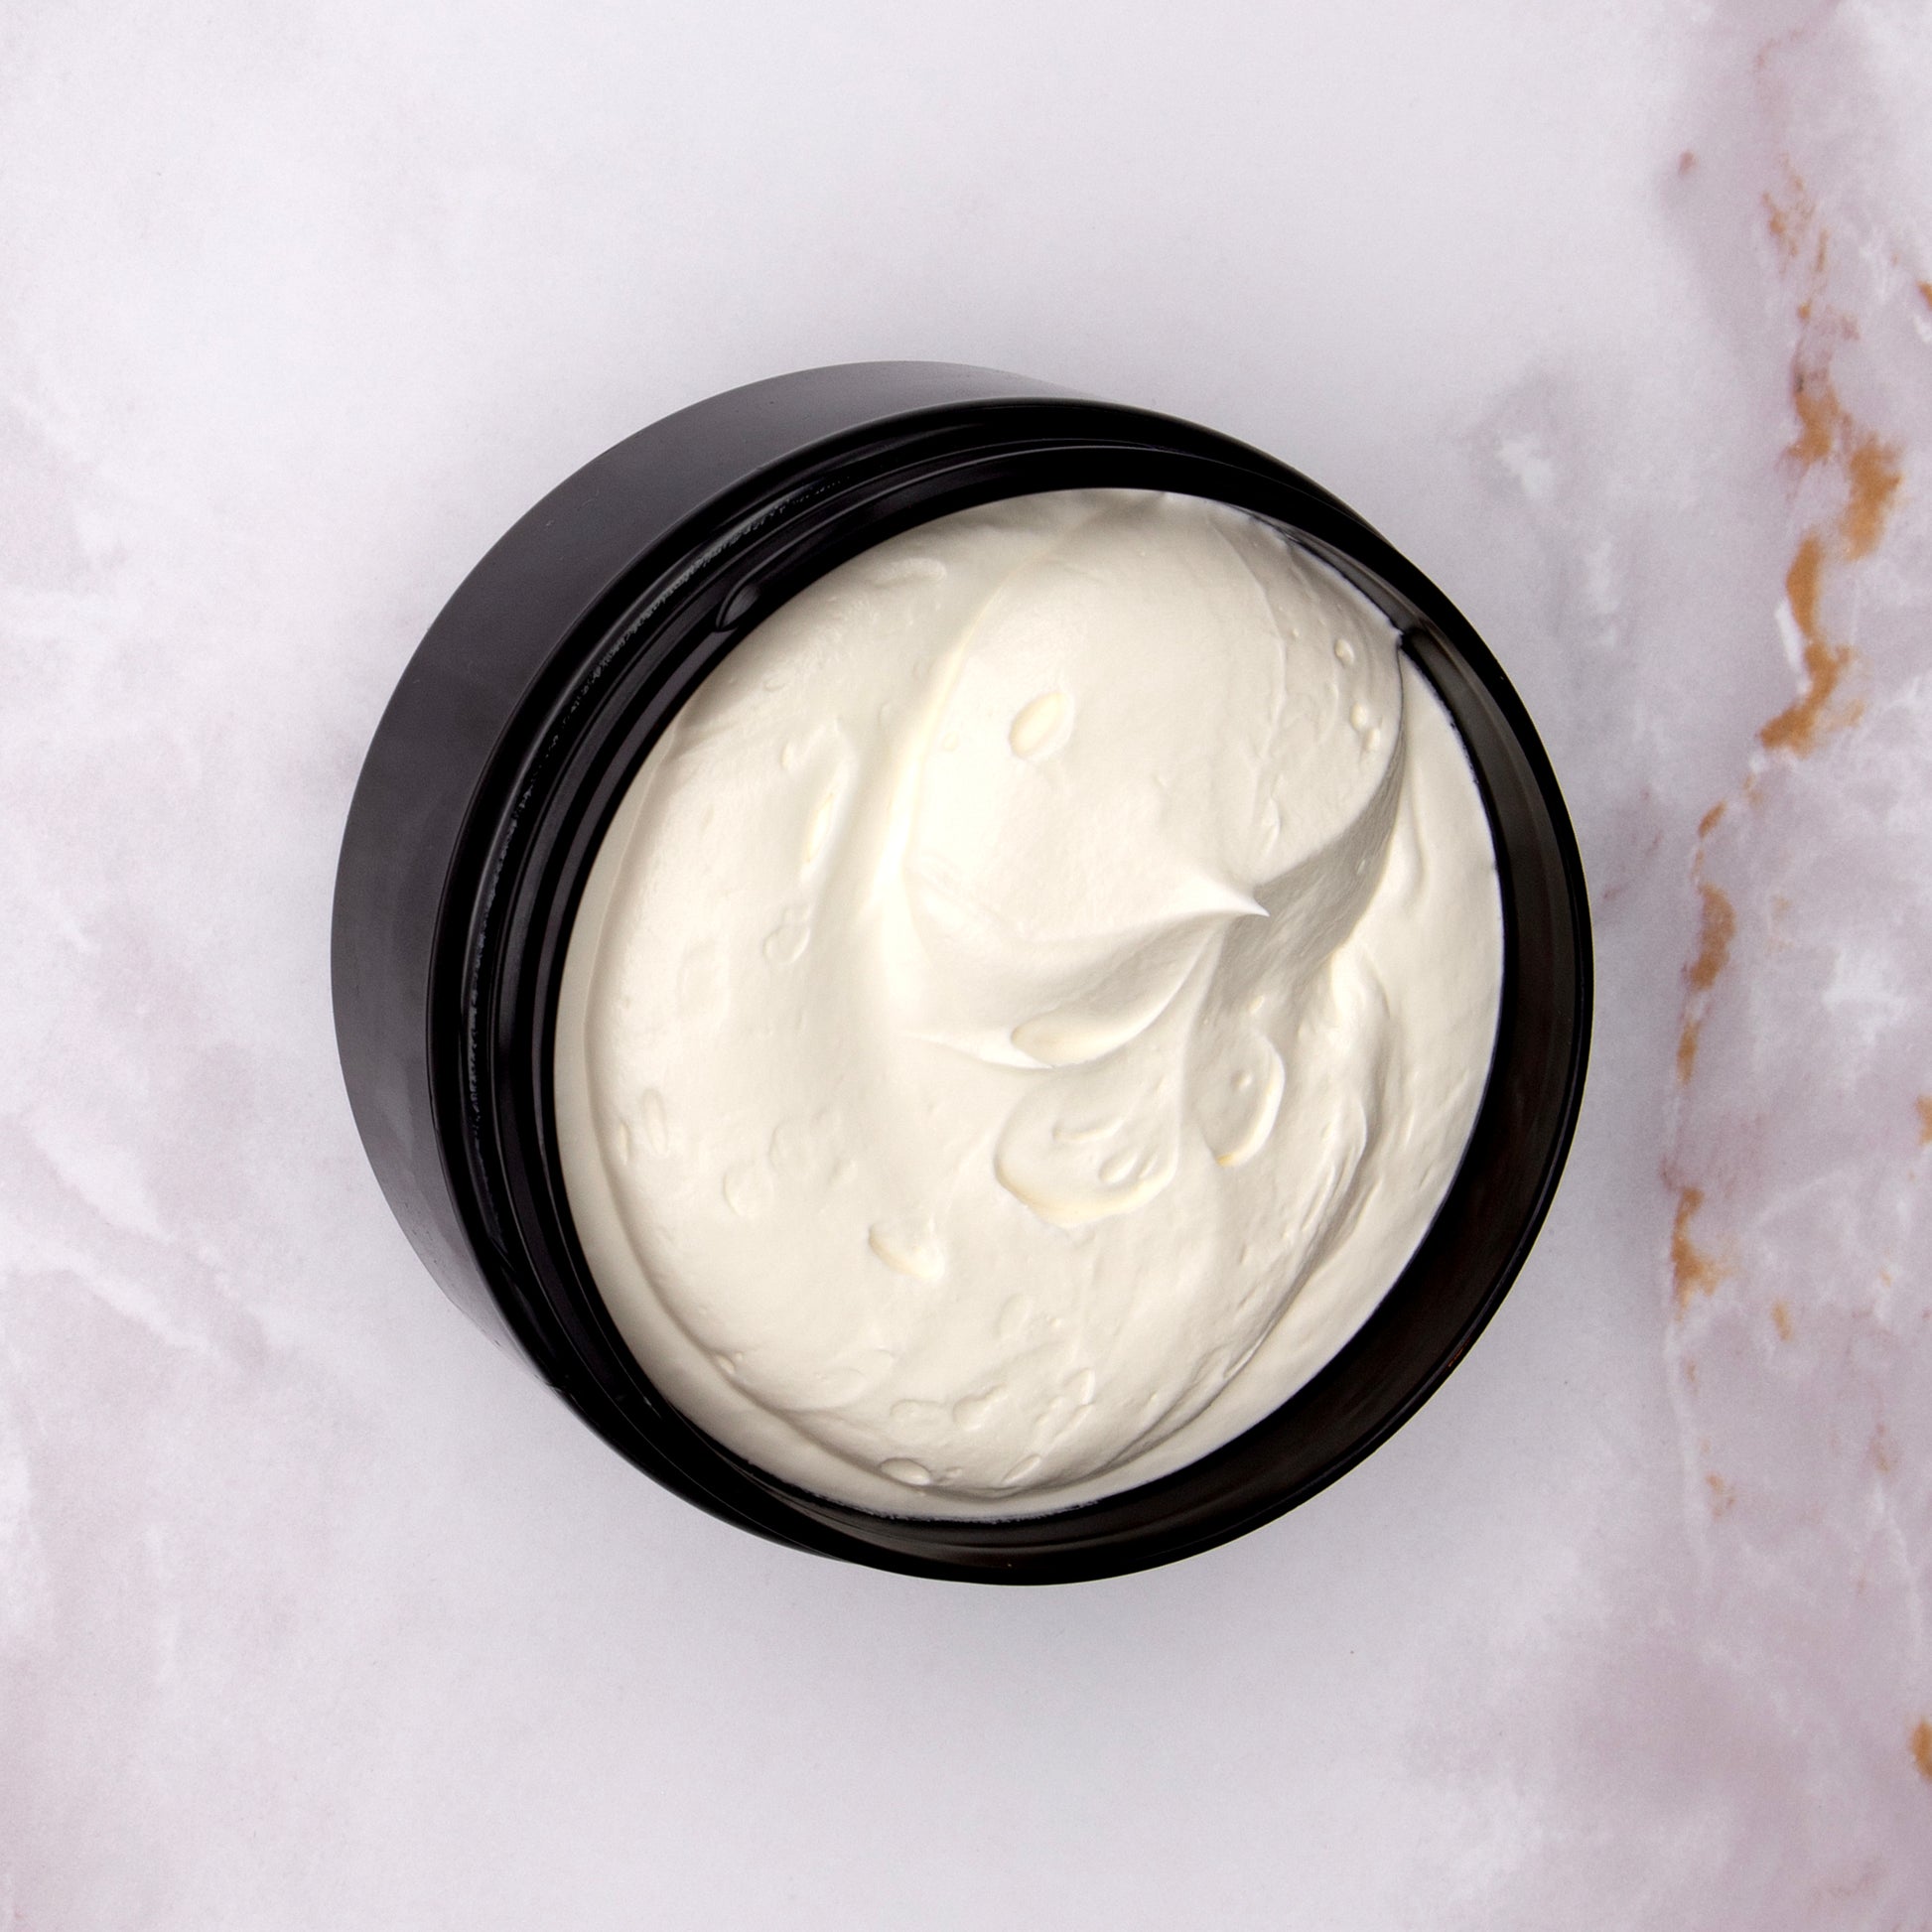 Wrap your body in waves of comforting velvety goodness with this indulgent Rose Tallow Body Butter. This sumptuous blend of Tallow, Mango butter, Cocoa Butter and rose flower oil.